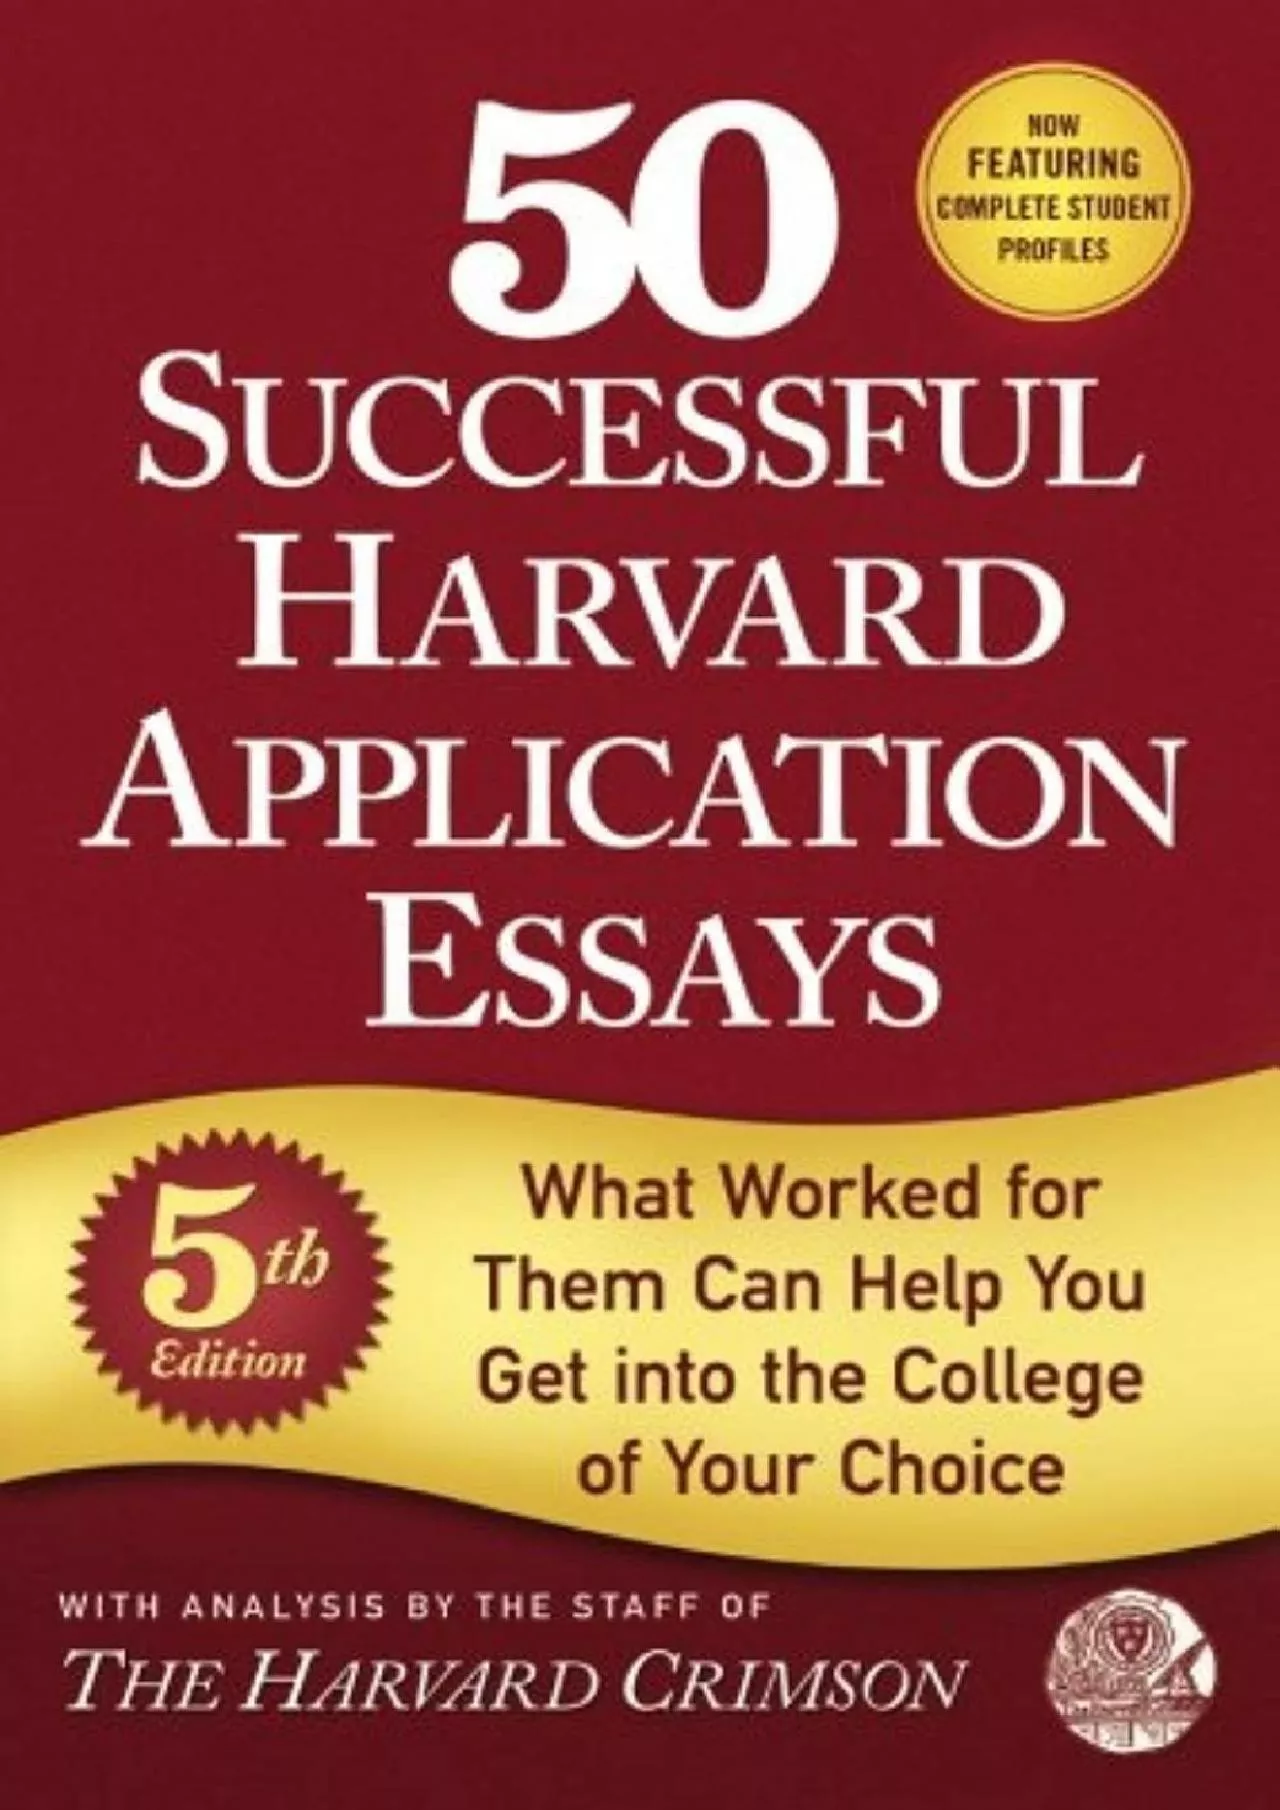 [DOWNLOAD] 50 Successful Harvard Application Essays, 5th Edition: What Worked for Them